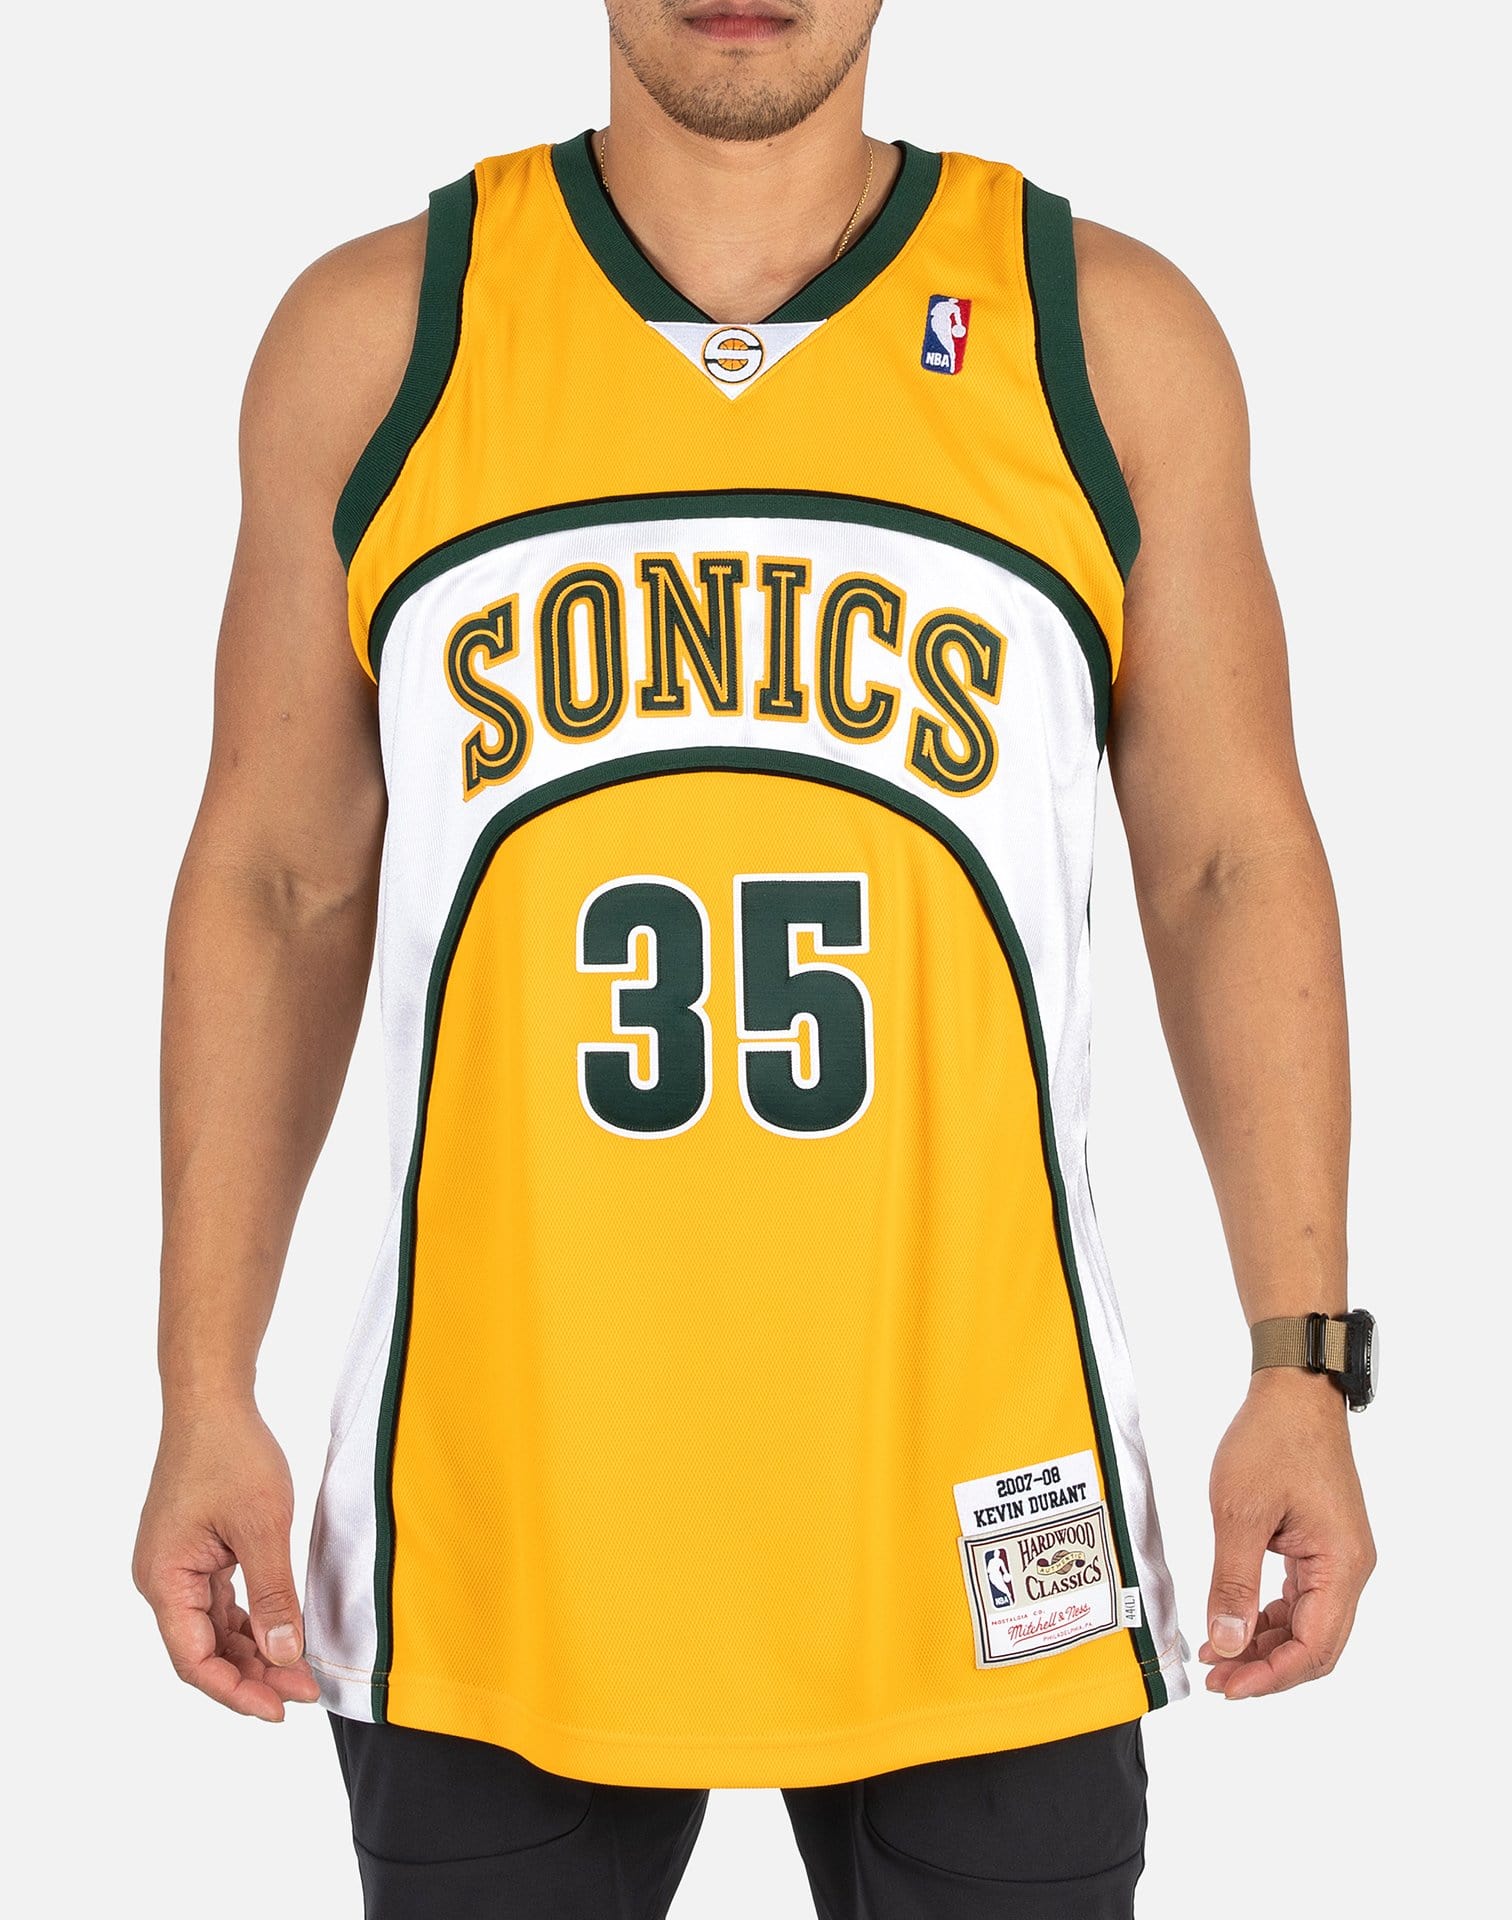 kevin durant sonic jersey